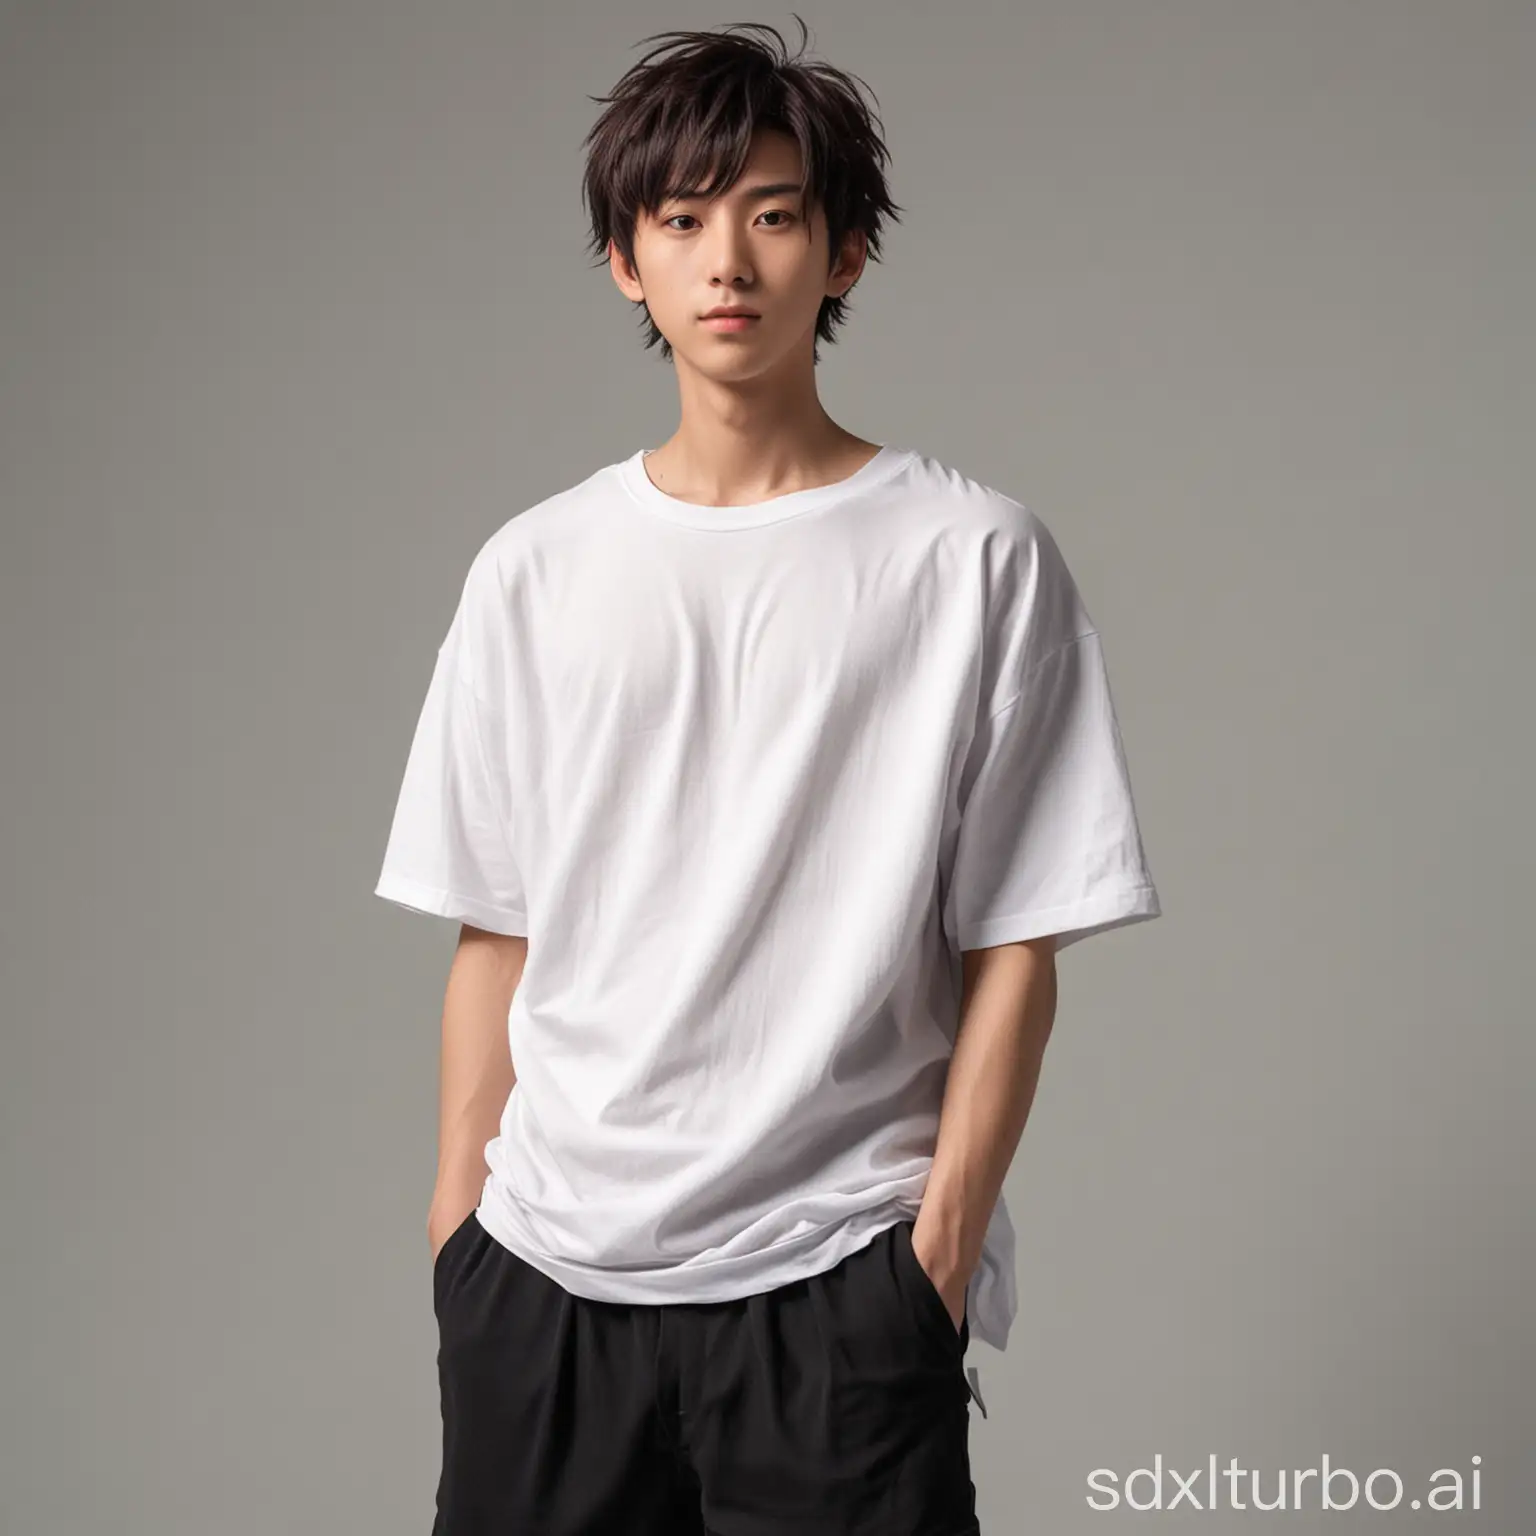 Muscular-Anime-Male-Model-Posing-in-Oversized-TShirt-for-Photoshoot